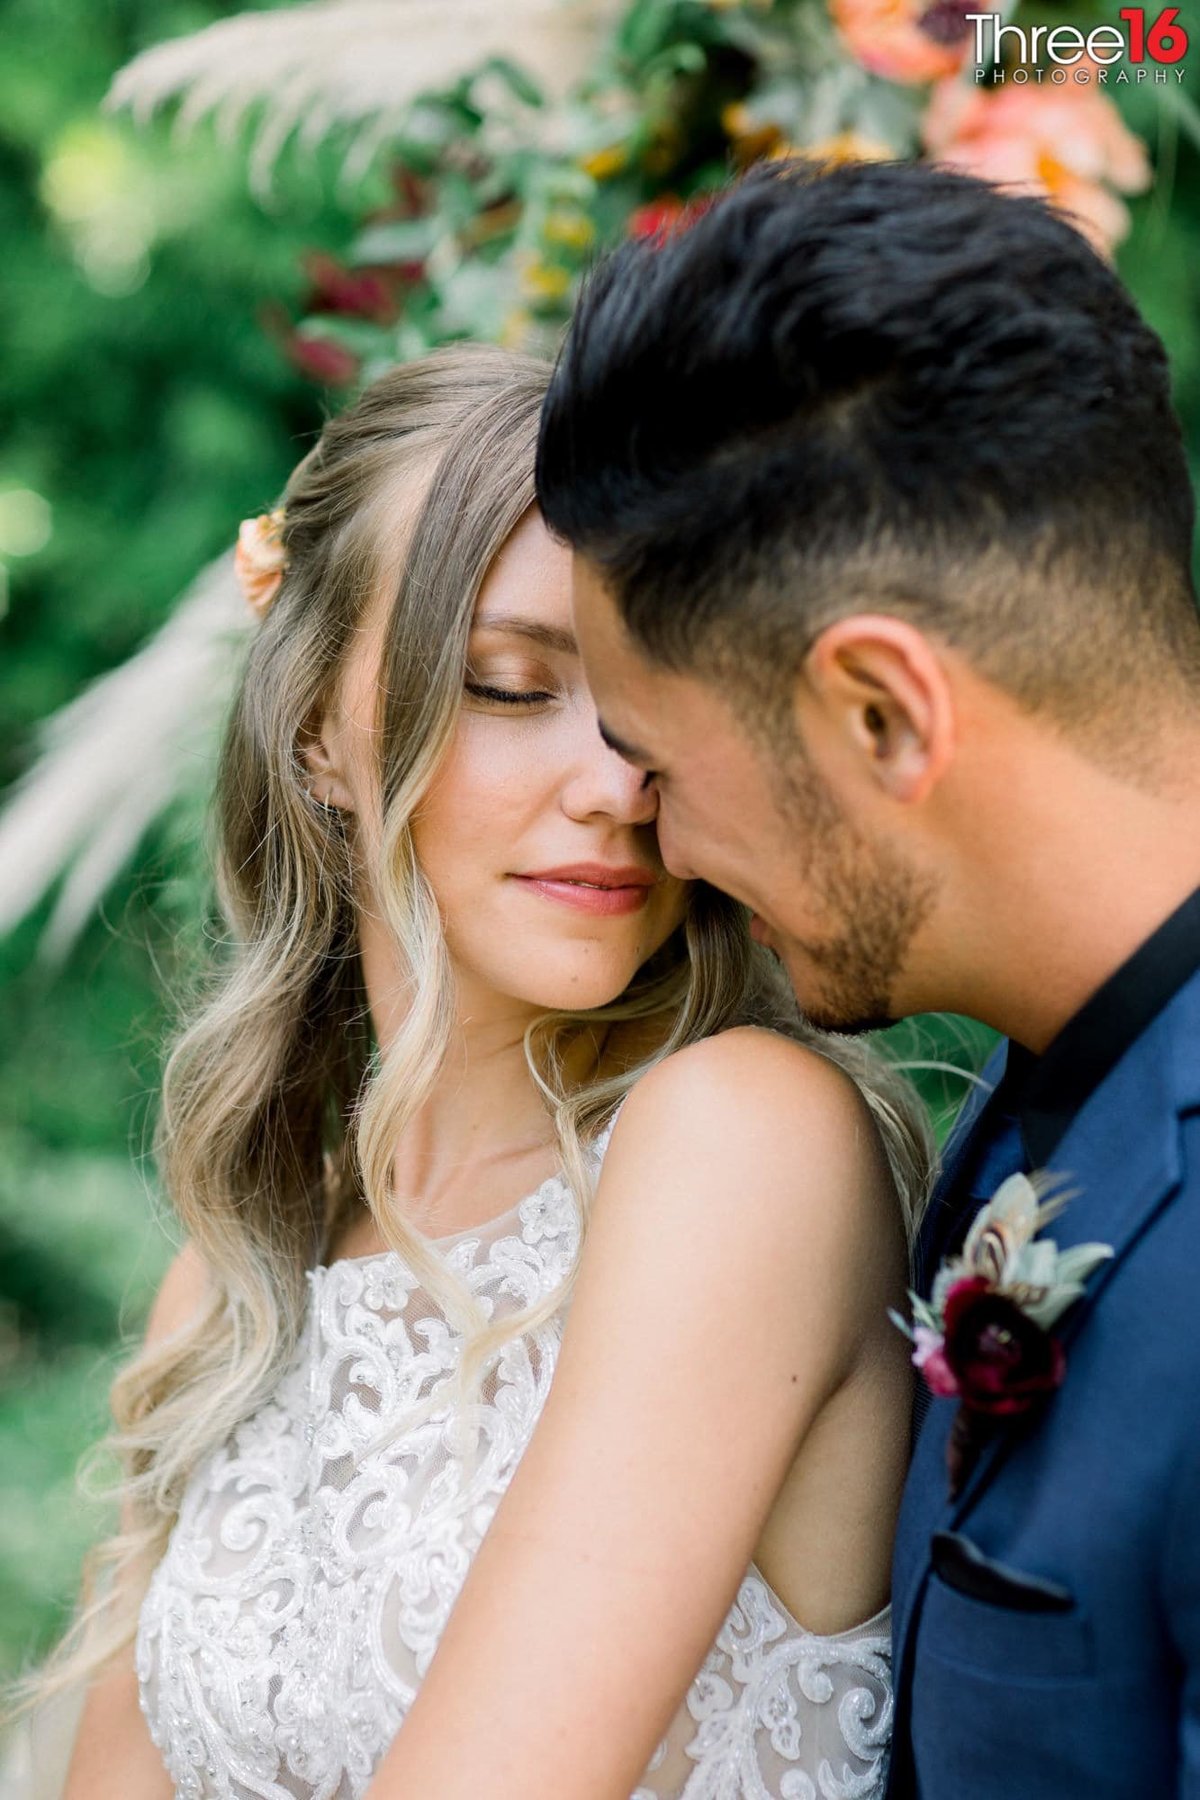 Sweet tender moment between Bride and Groom as they cozy up to each other